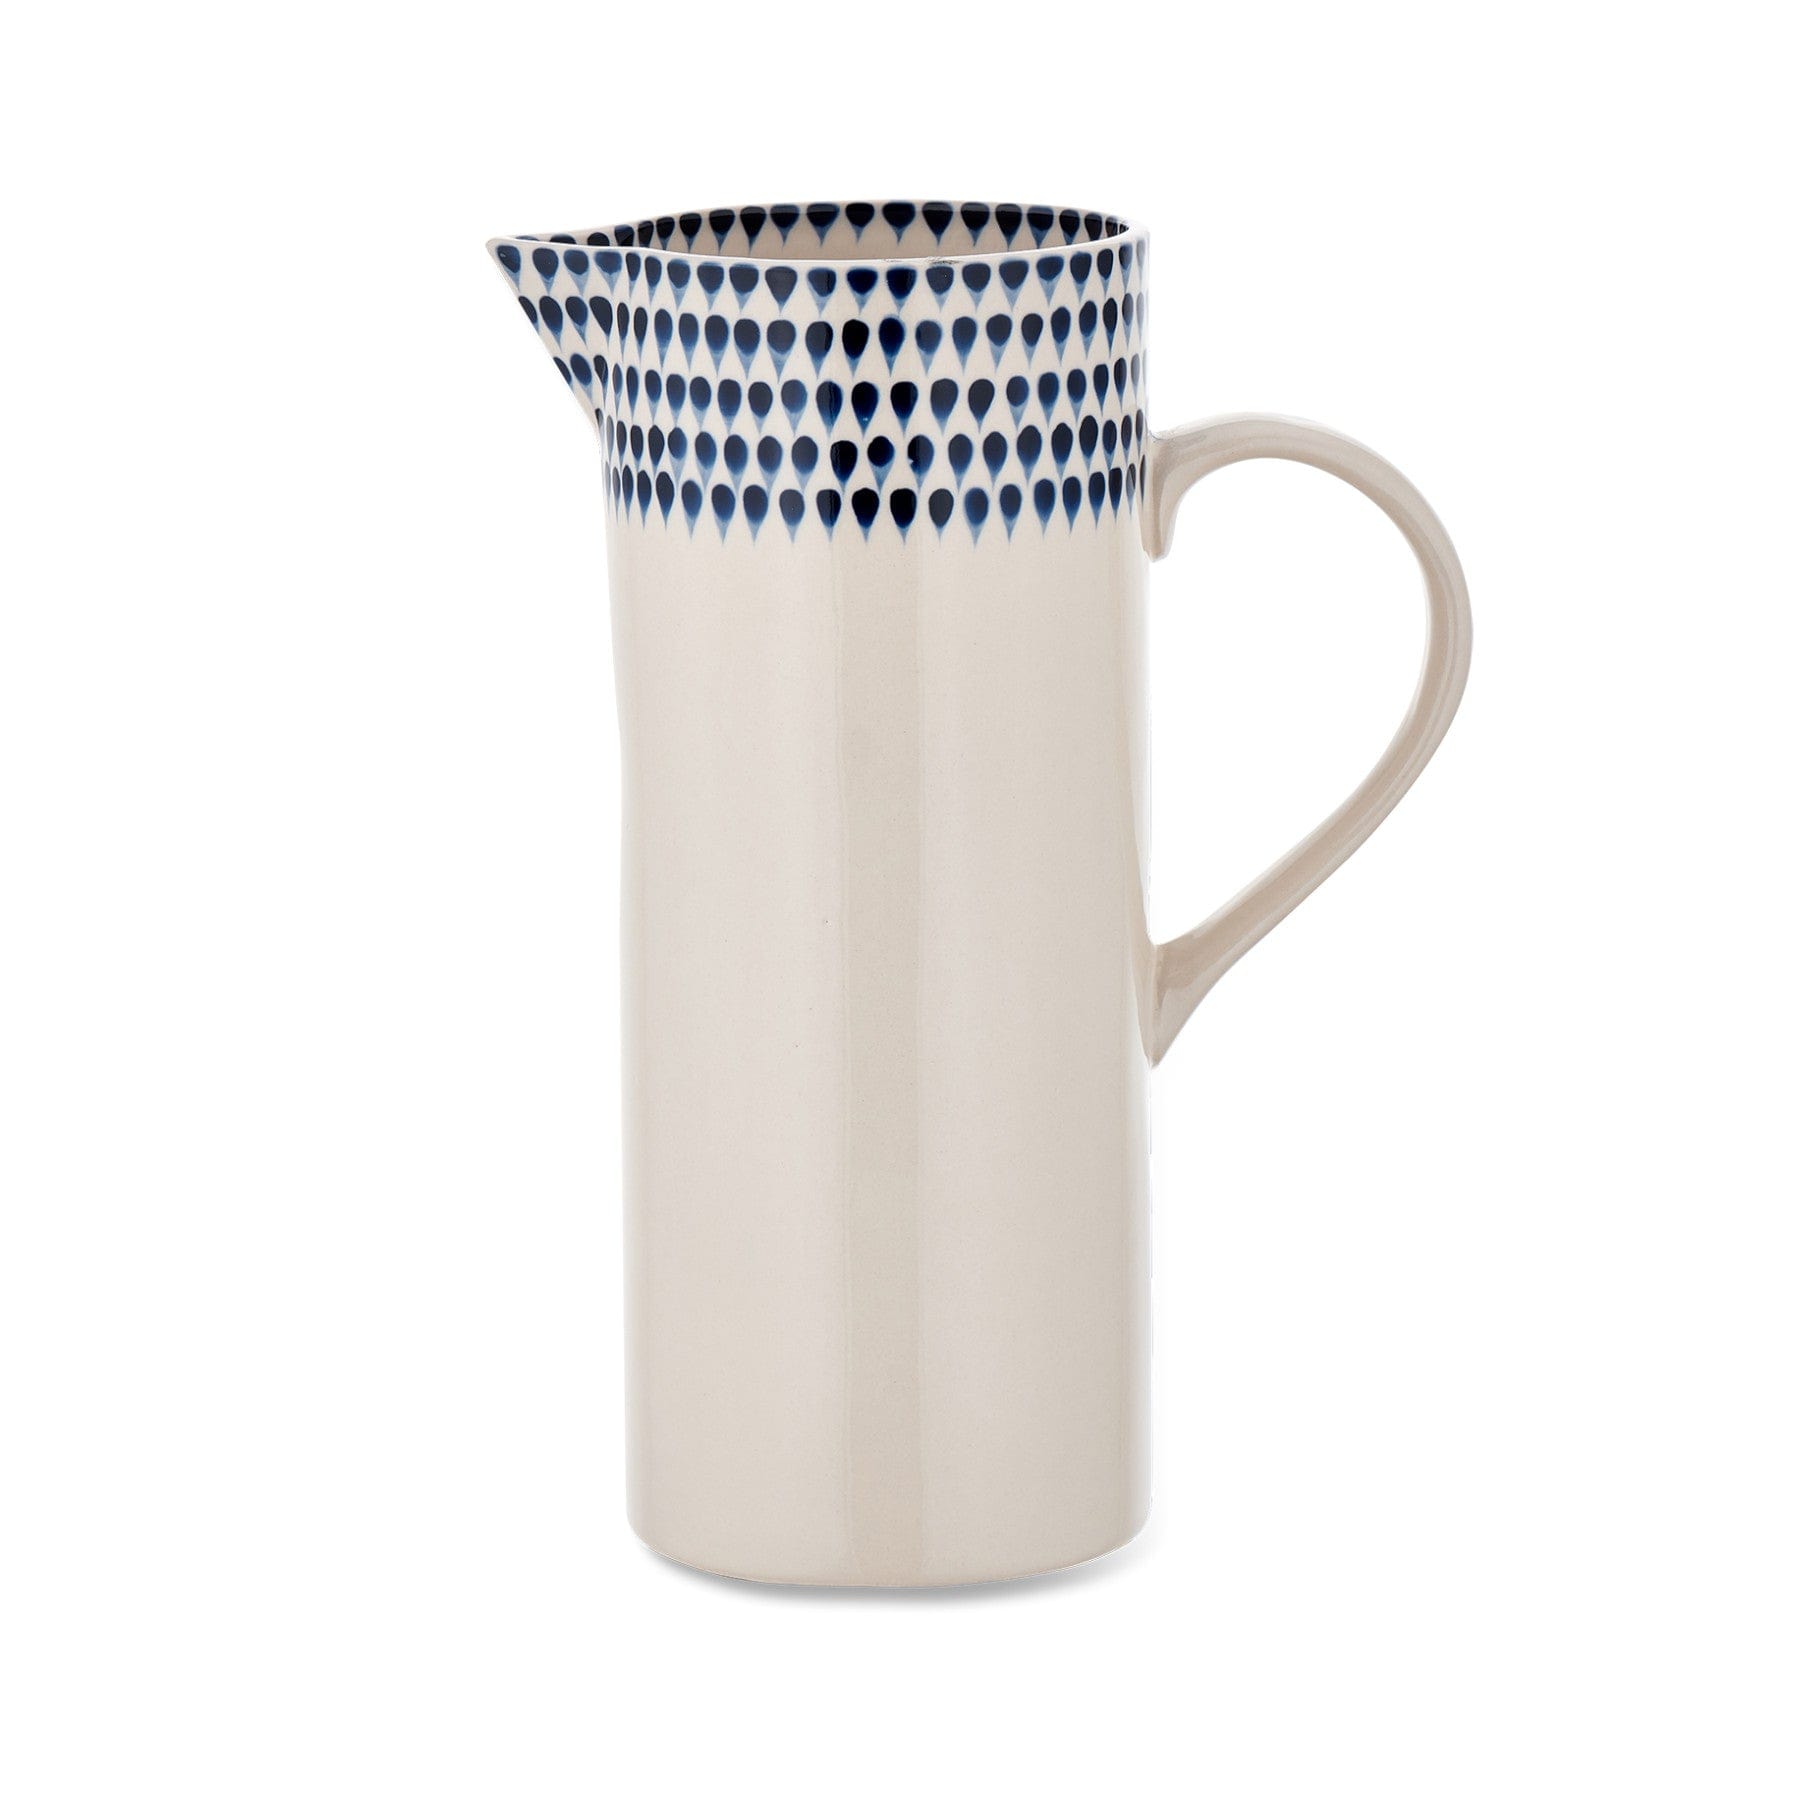 Tall ceramic pitcher with blue and white geometric pattern on upper half, isolated on white background.